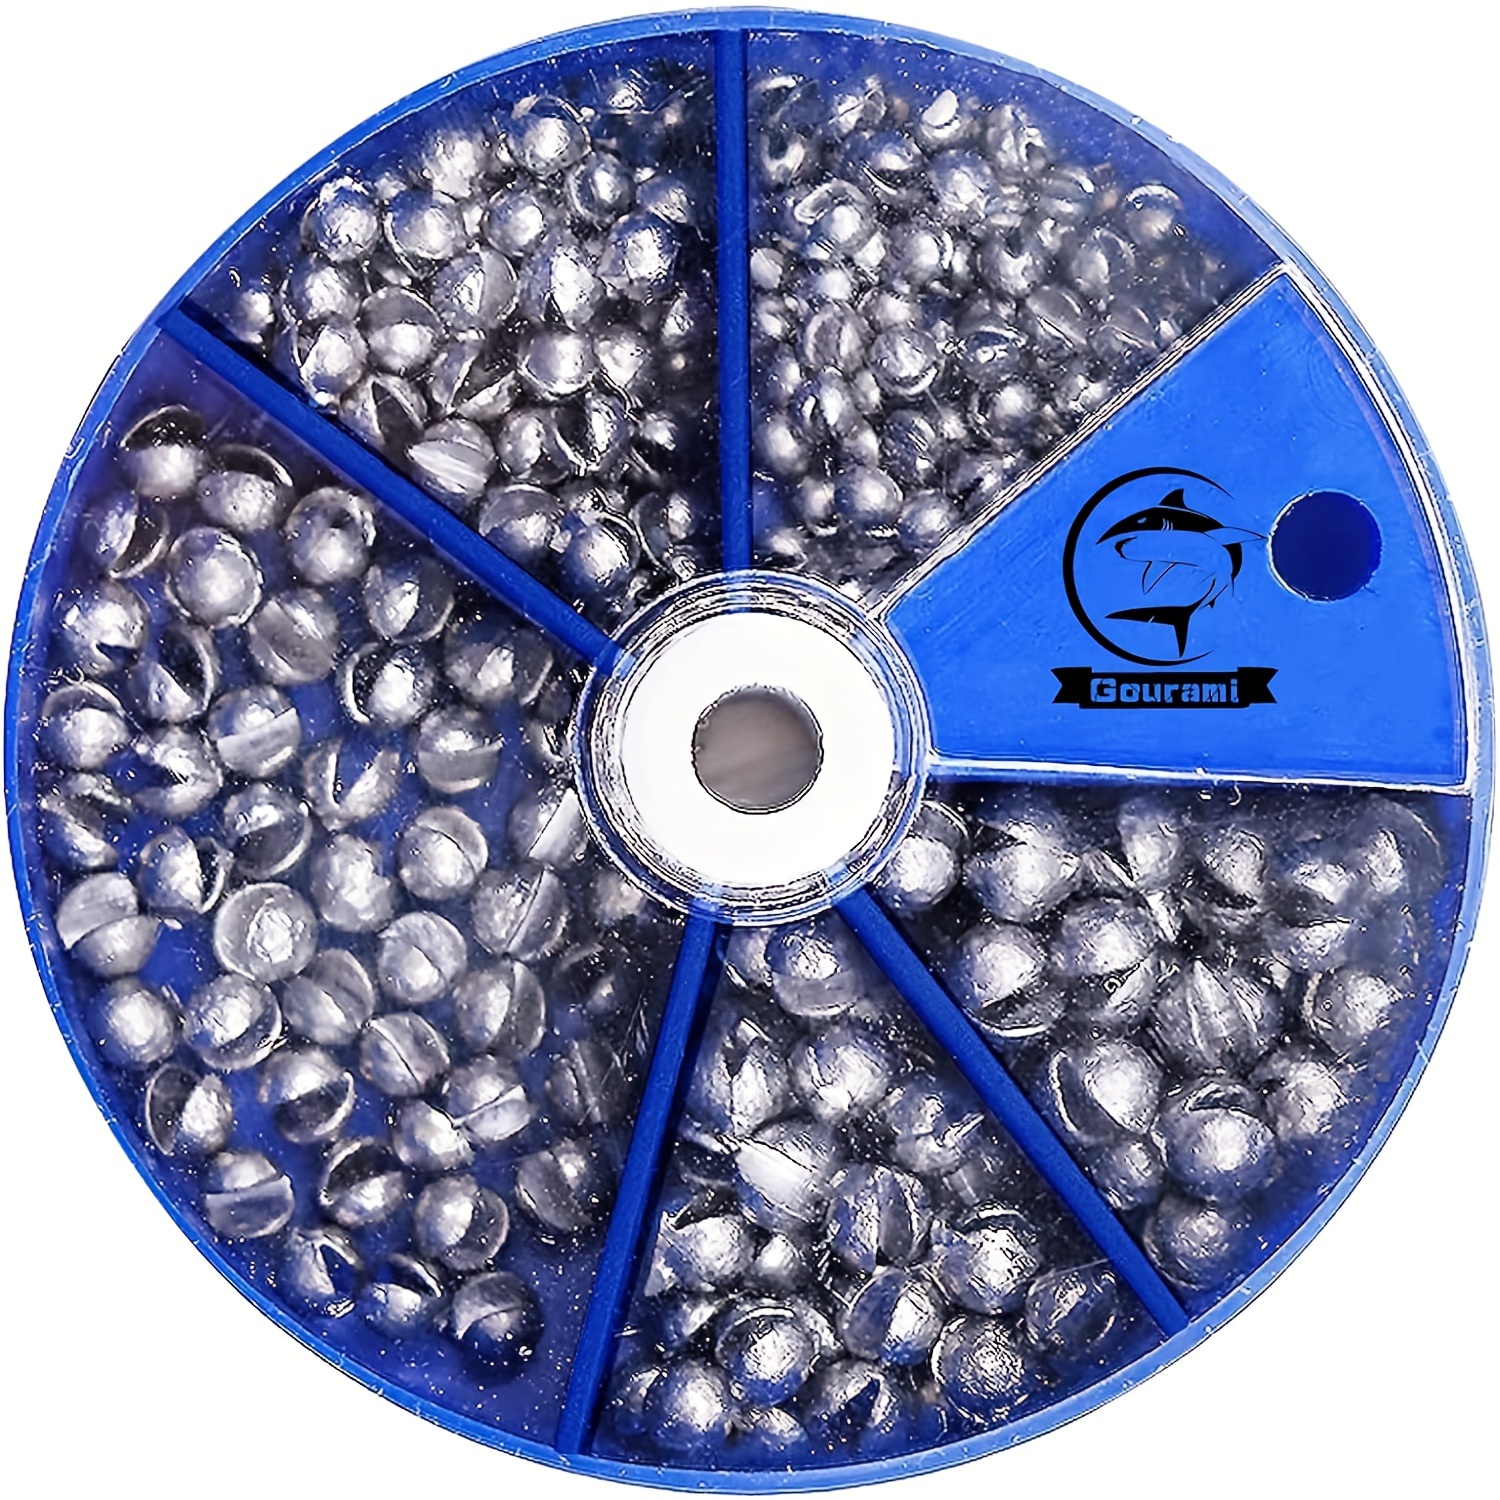 230pcs/107pcs Split Shot Lead Weights, Removable Round Opening Fishing  Sinkers, Fishing Accessories